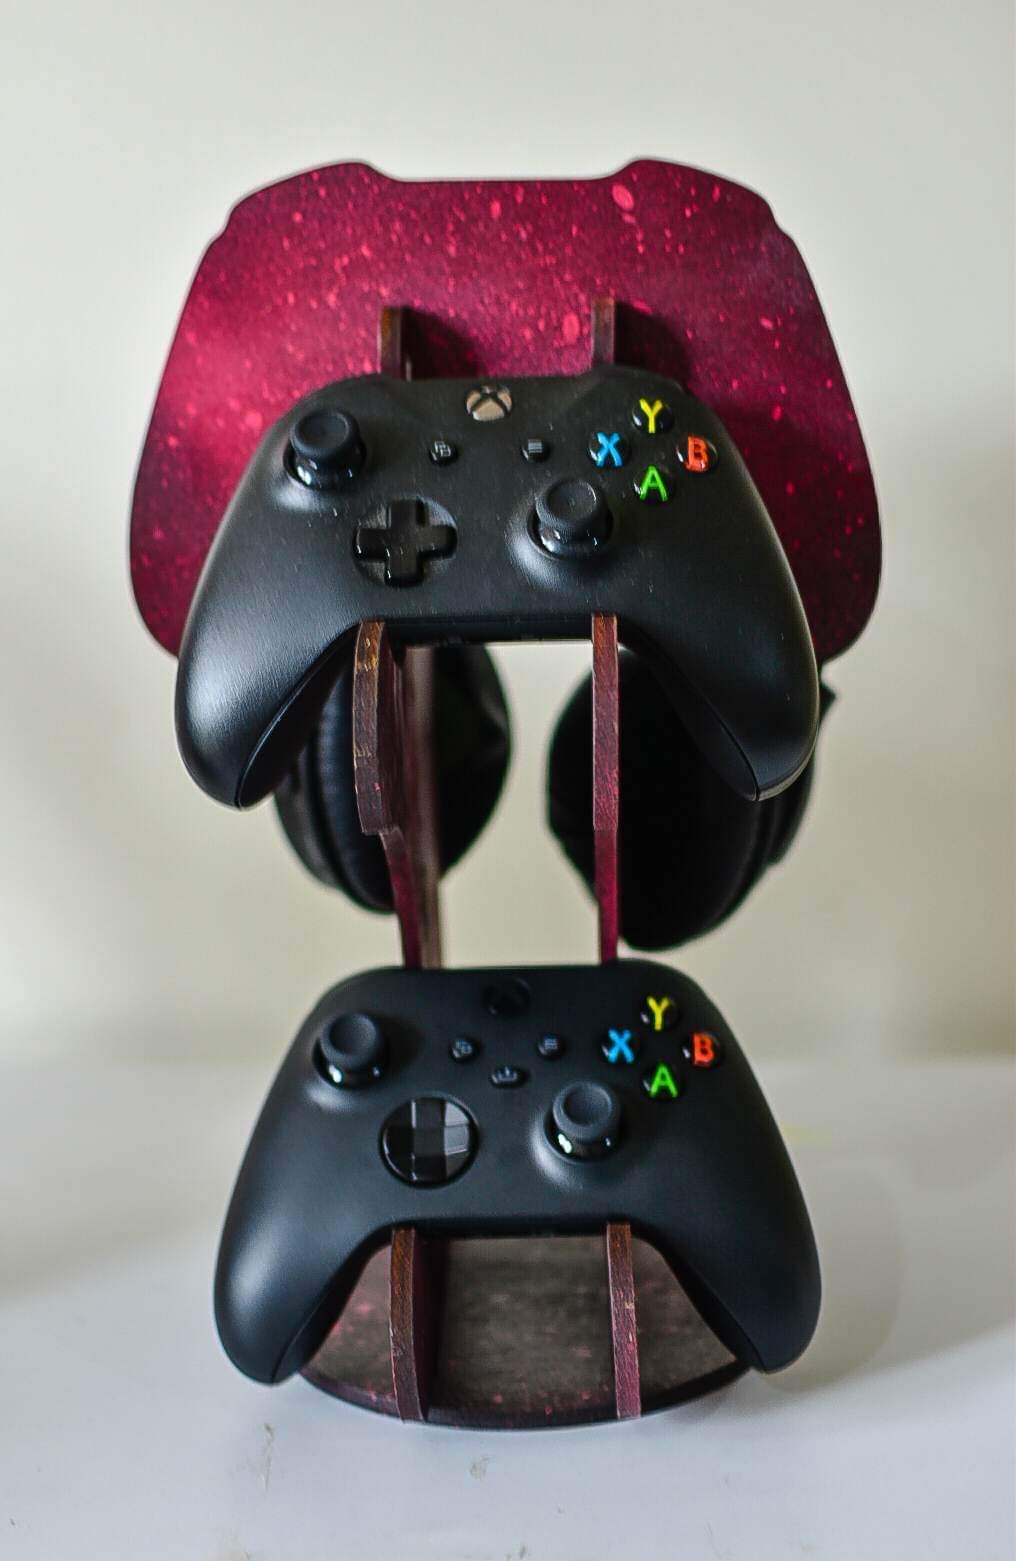 Personalised Controller holders for Xbox or Playstation controllers